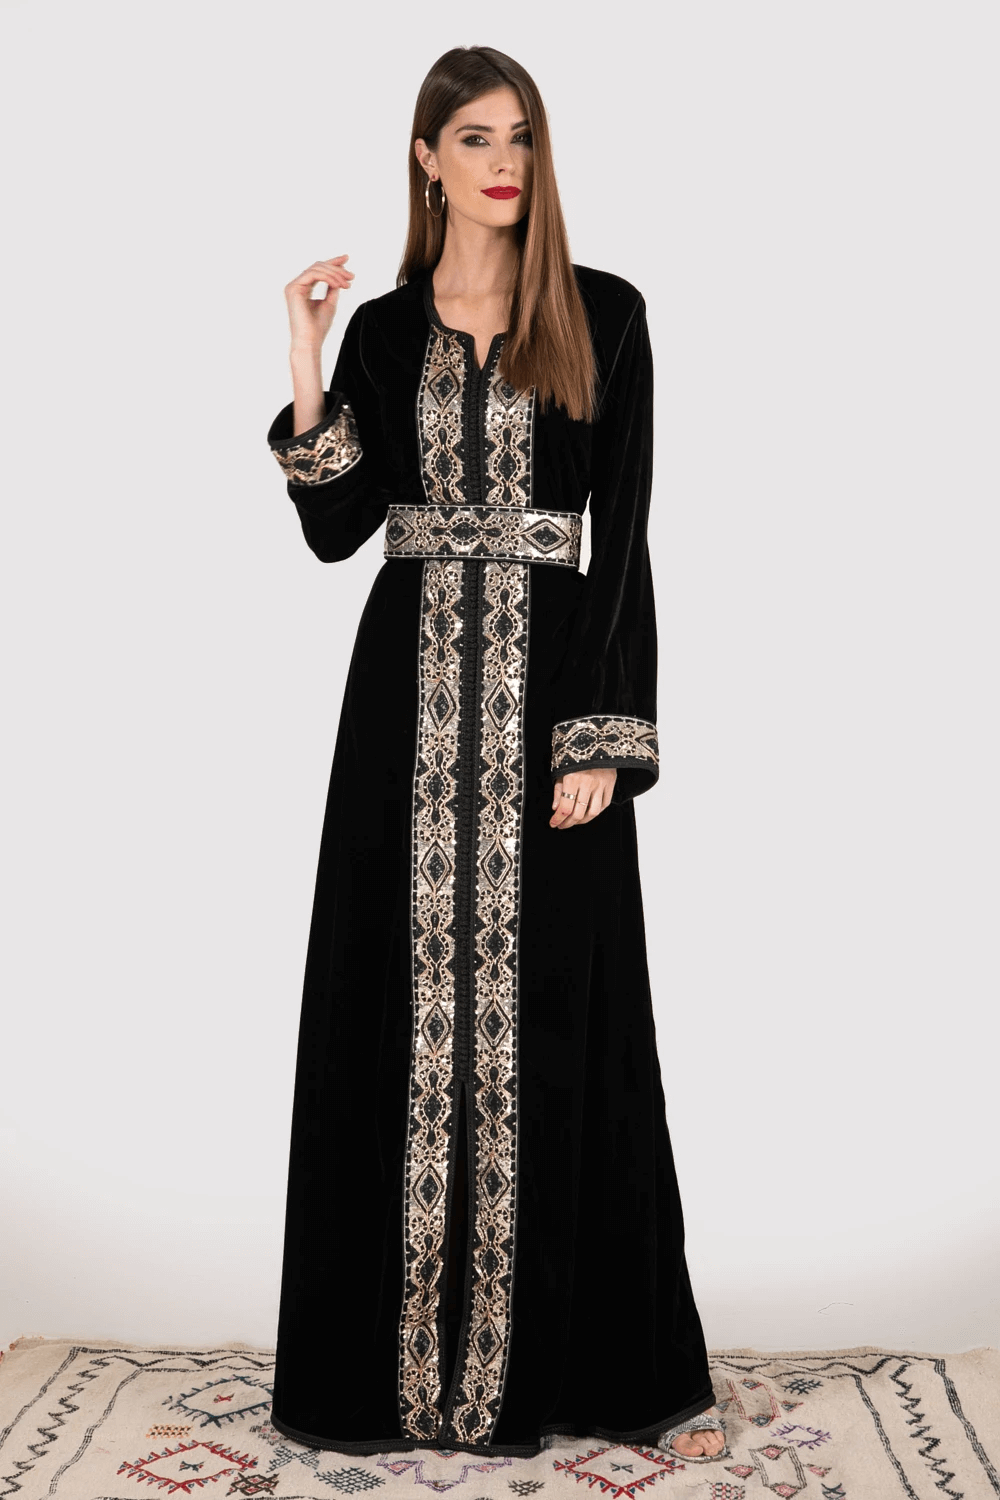 Lebssa Nahid Long Sleeve Formal Occasion Wear Full-Length Embroidered Dress in Black